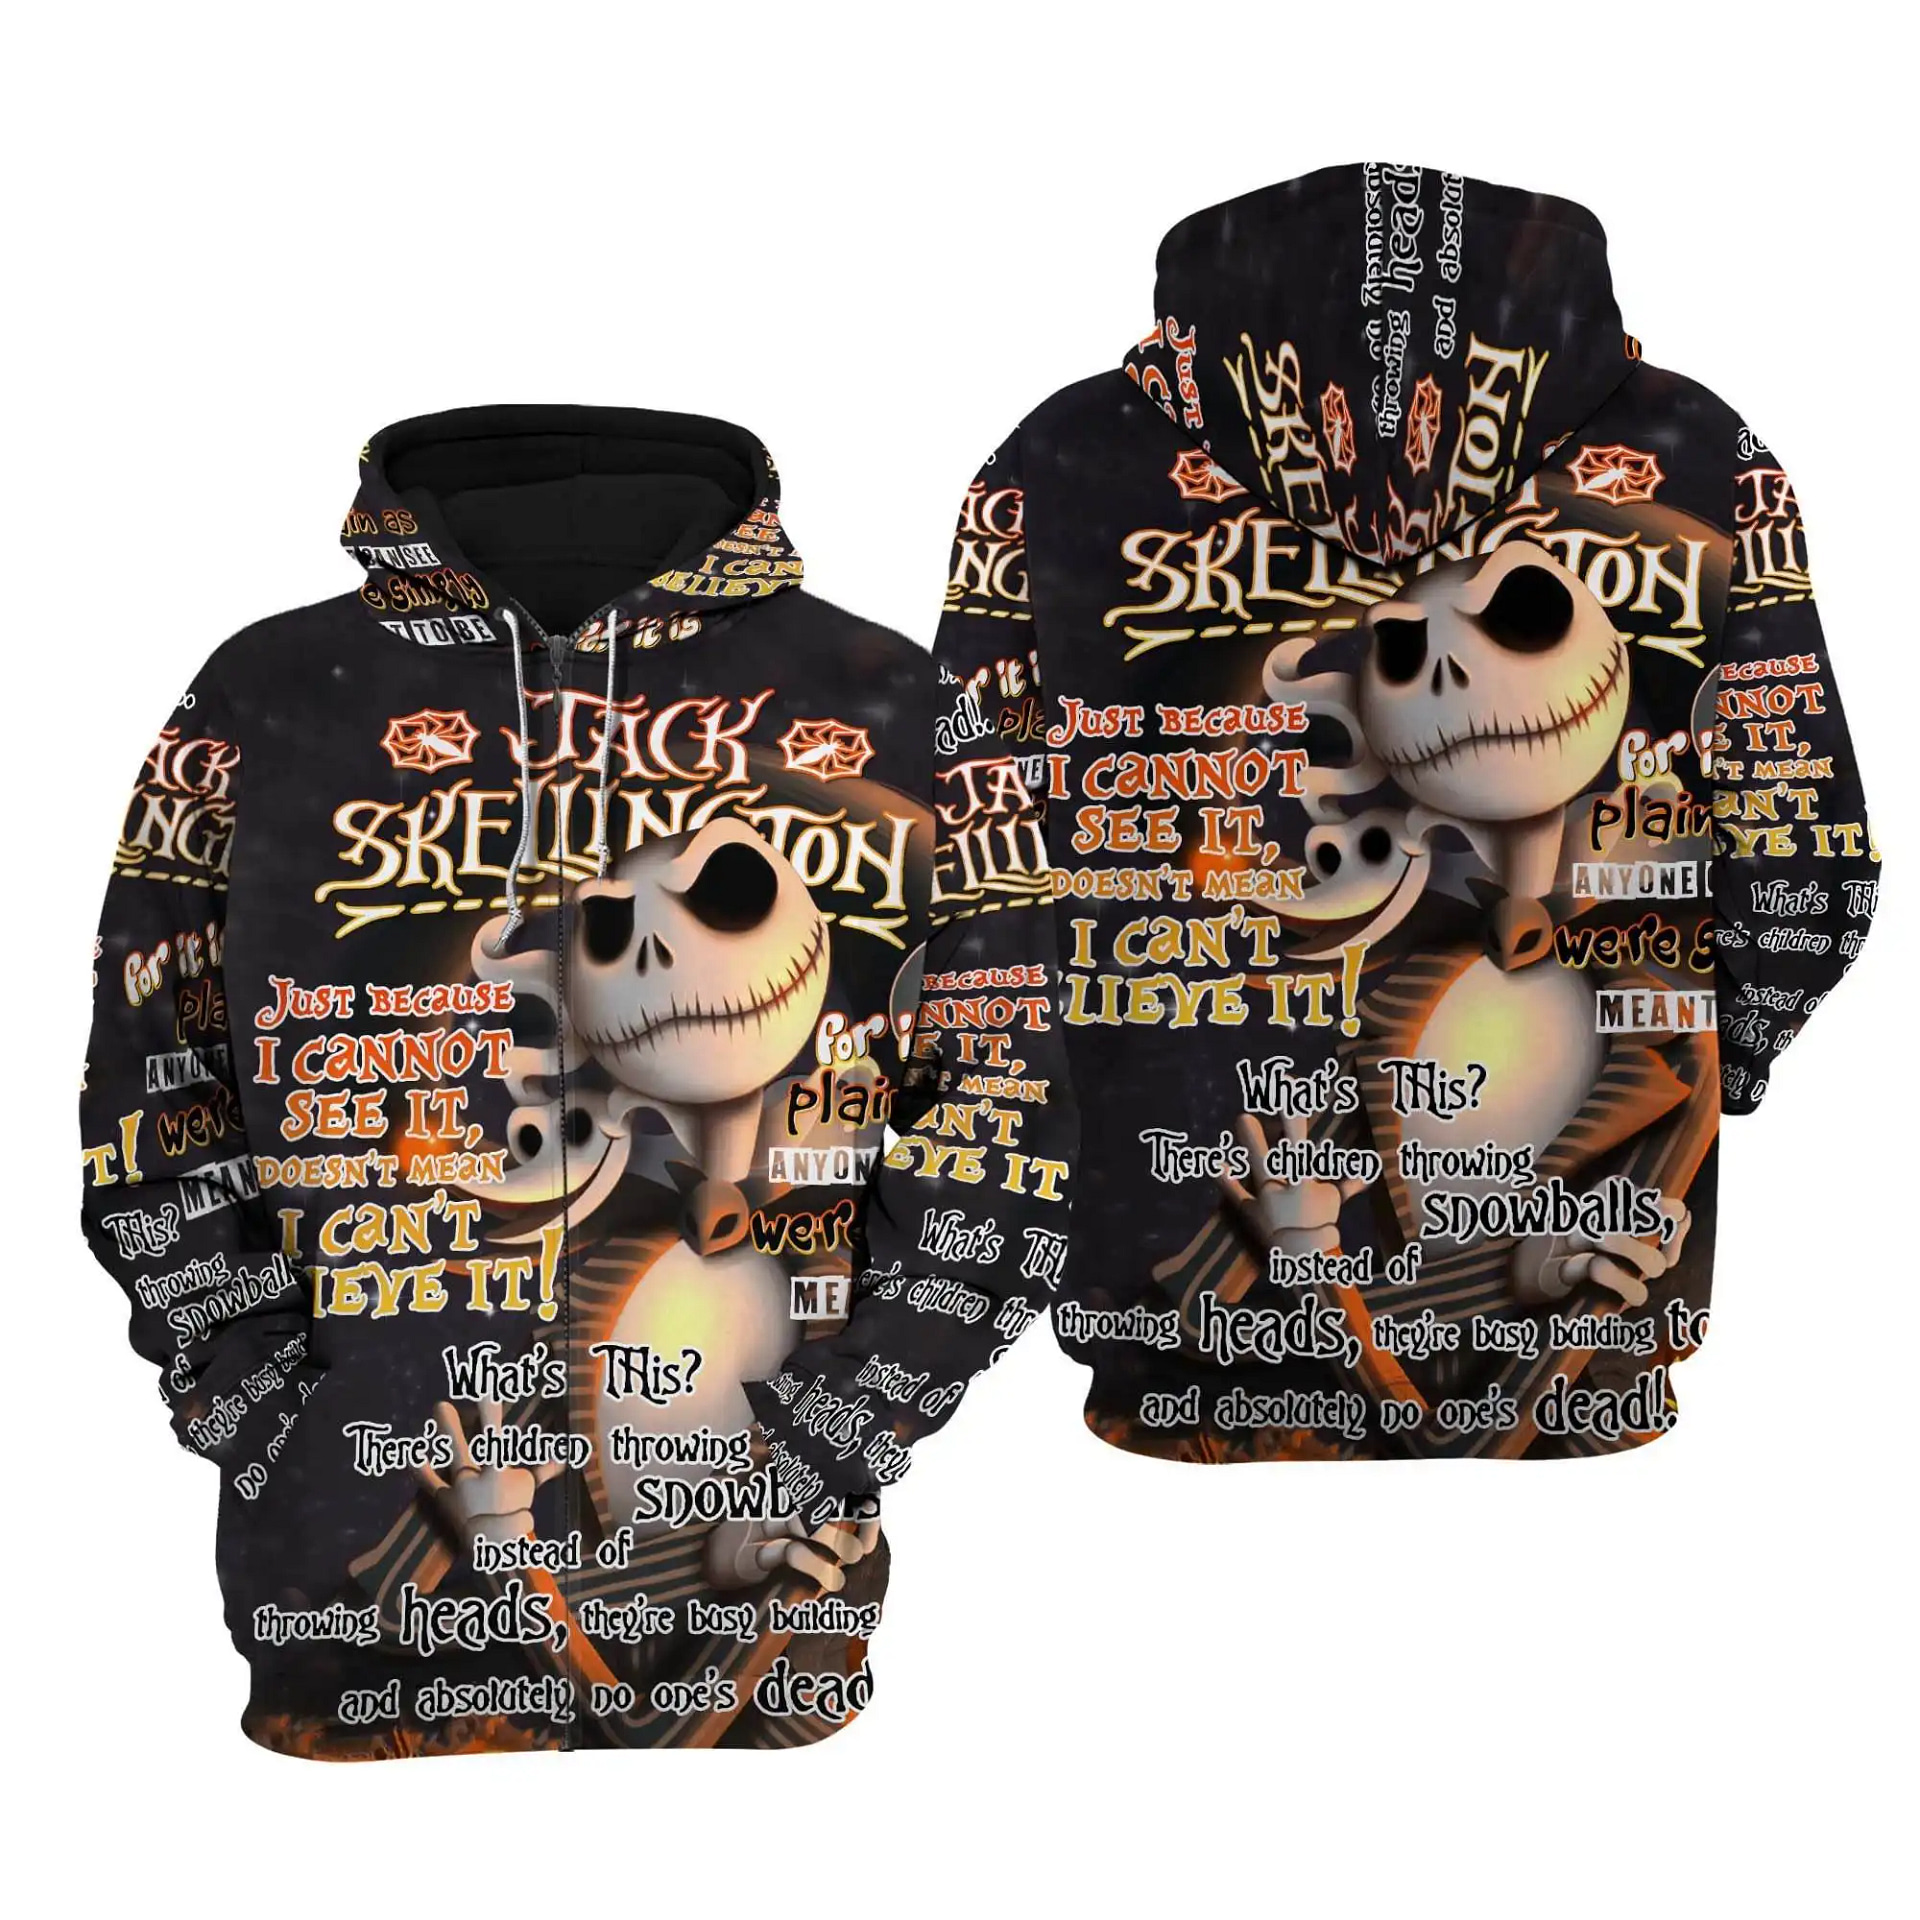 Jack Skull Punk Words Pattern Disney Quotes Cartoon Graphic Outfits Clothing Men Women Kids Toddlers Hoodie 3D